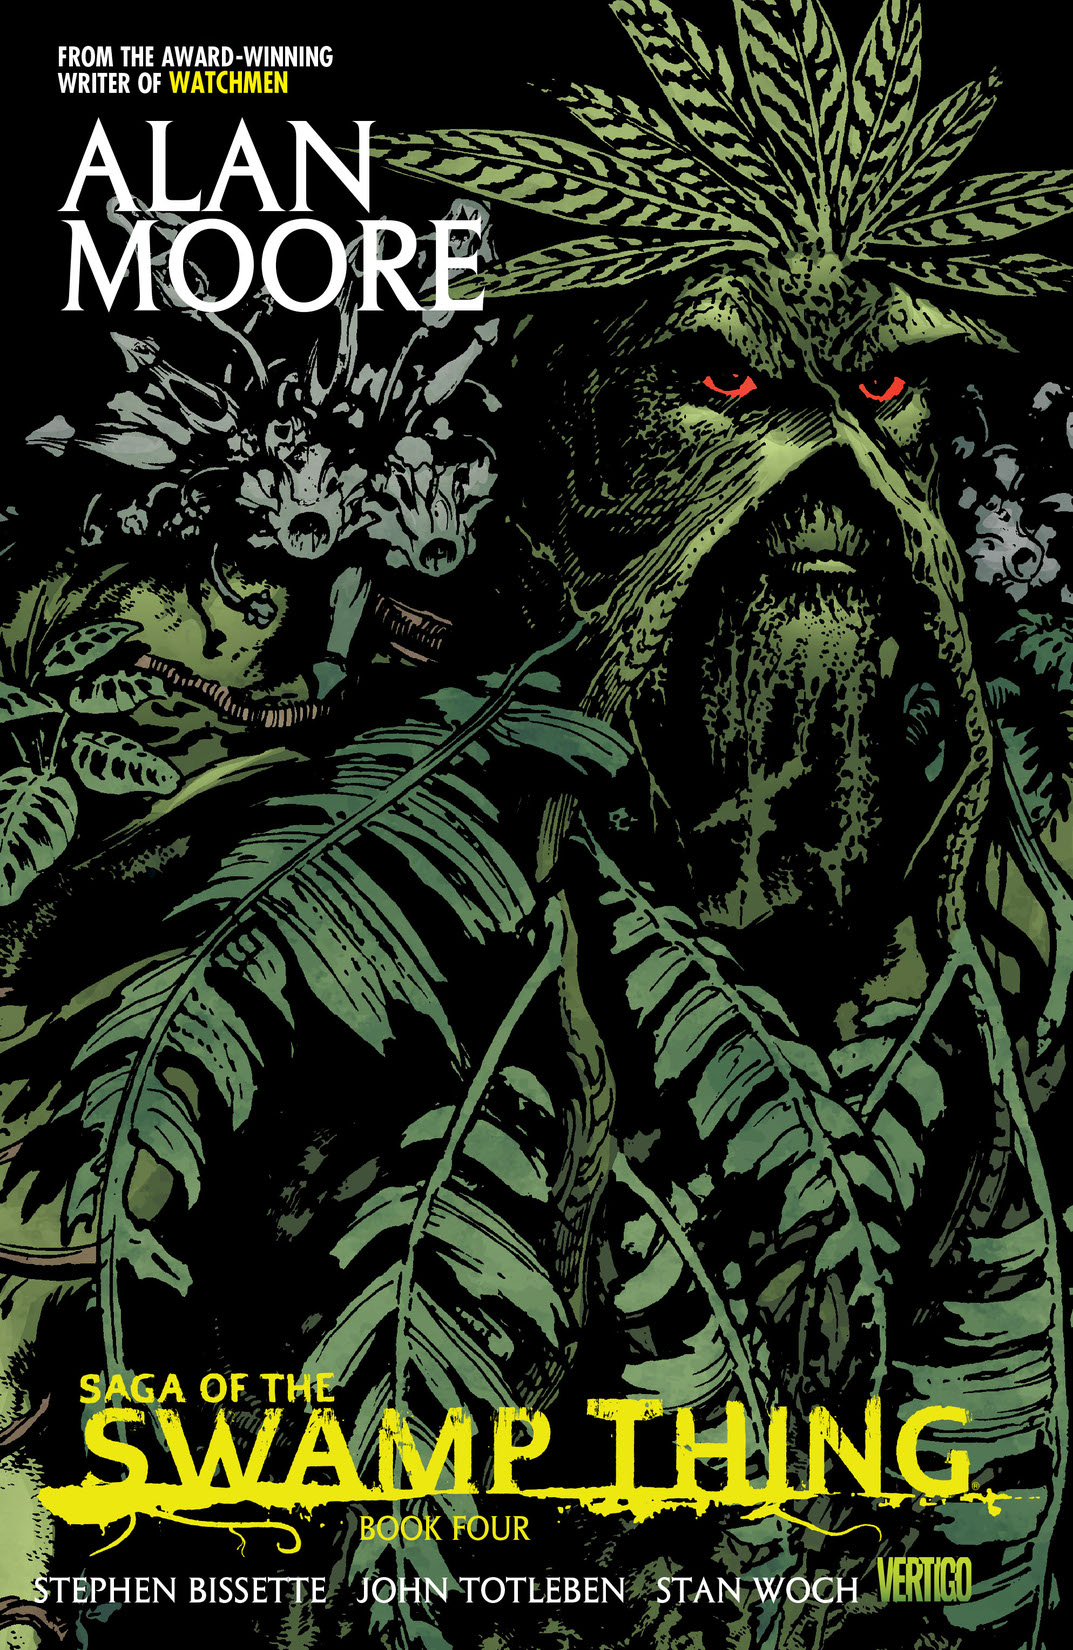 Saga of the Swamp Thing Book 4 preview images